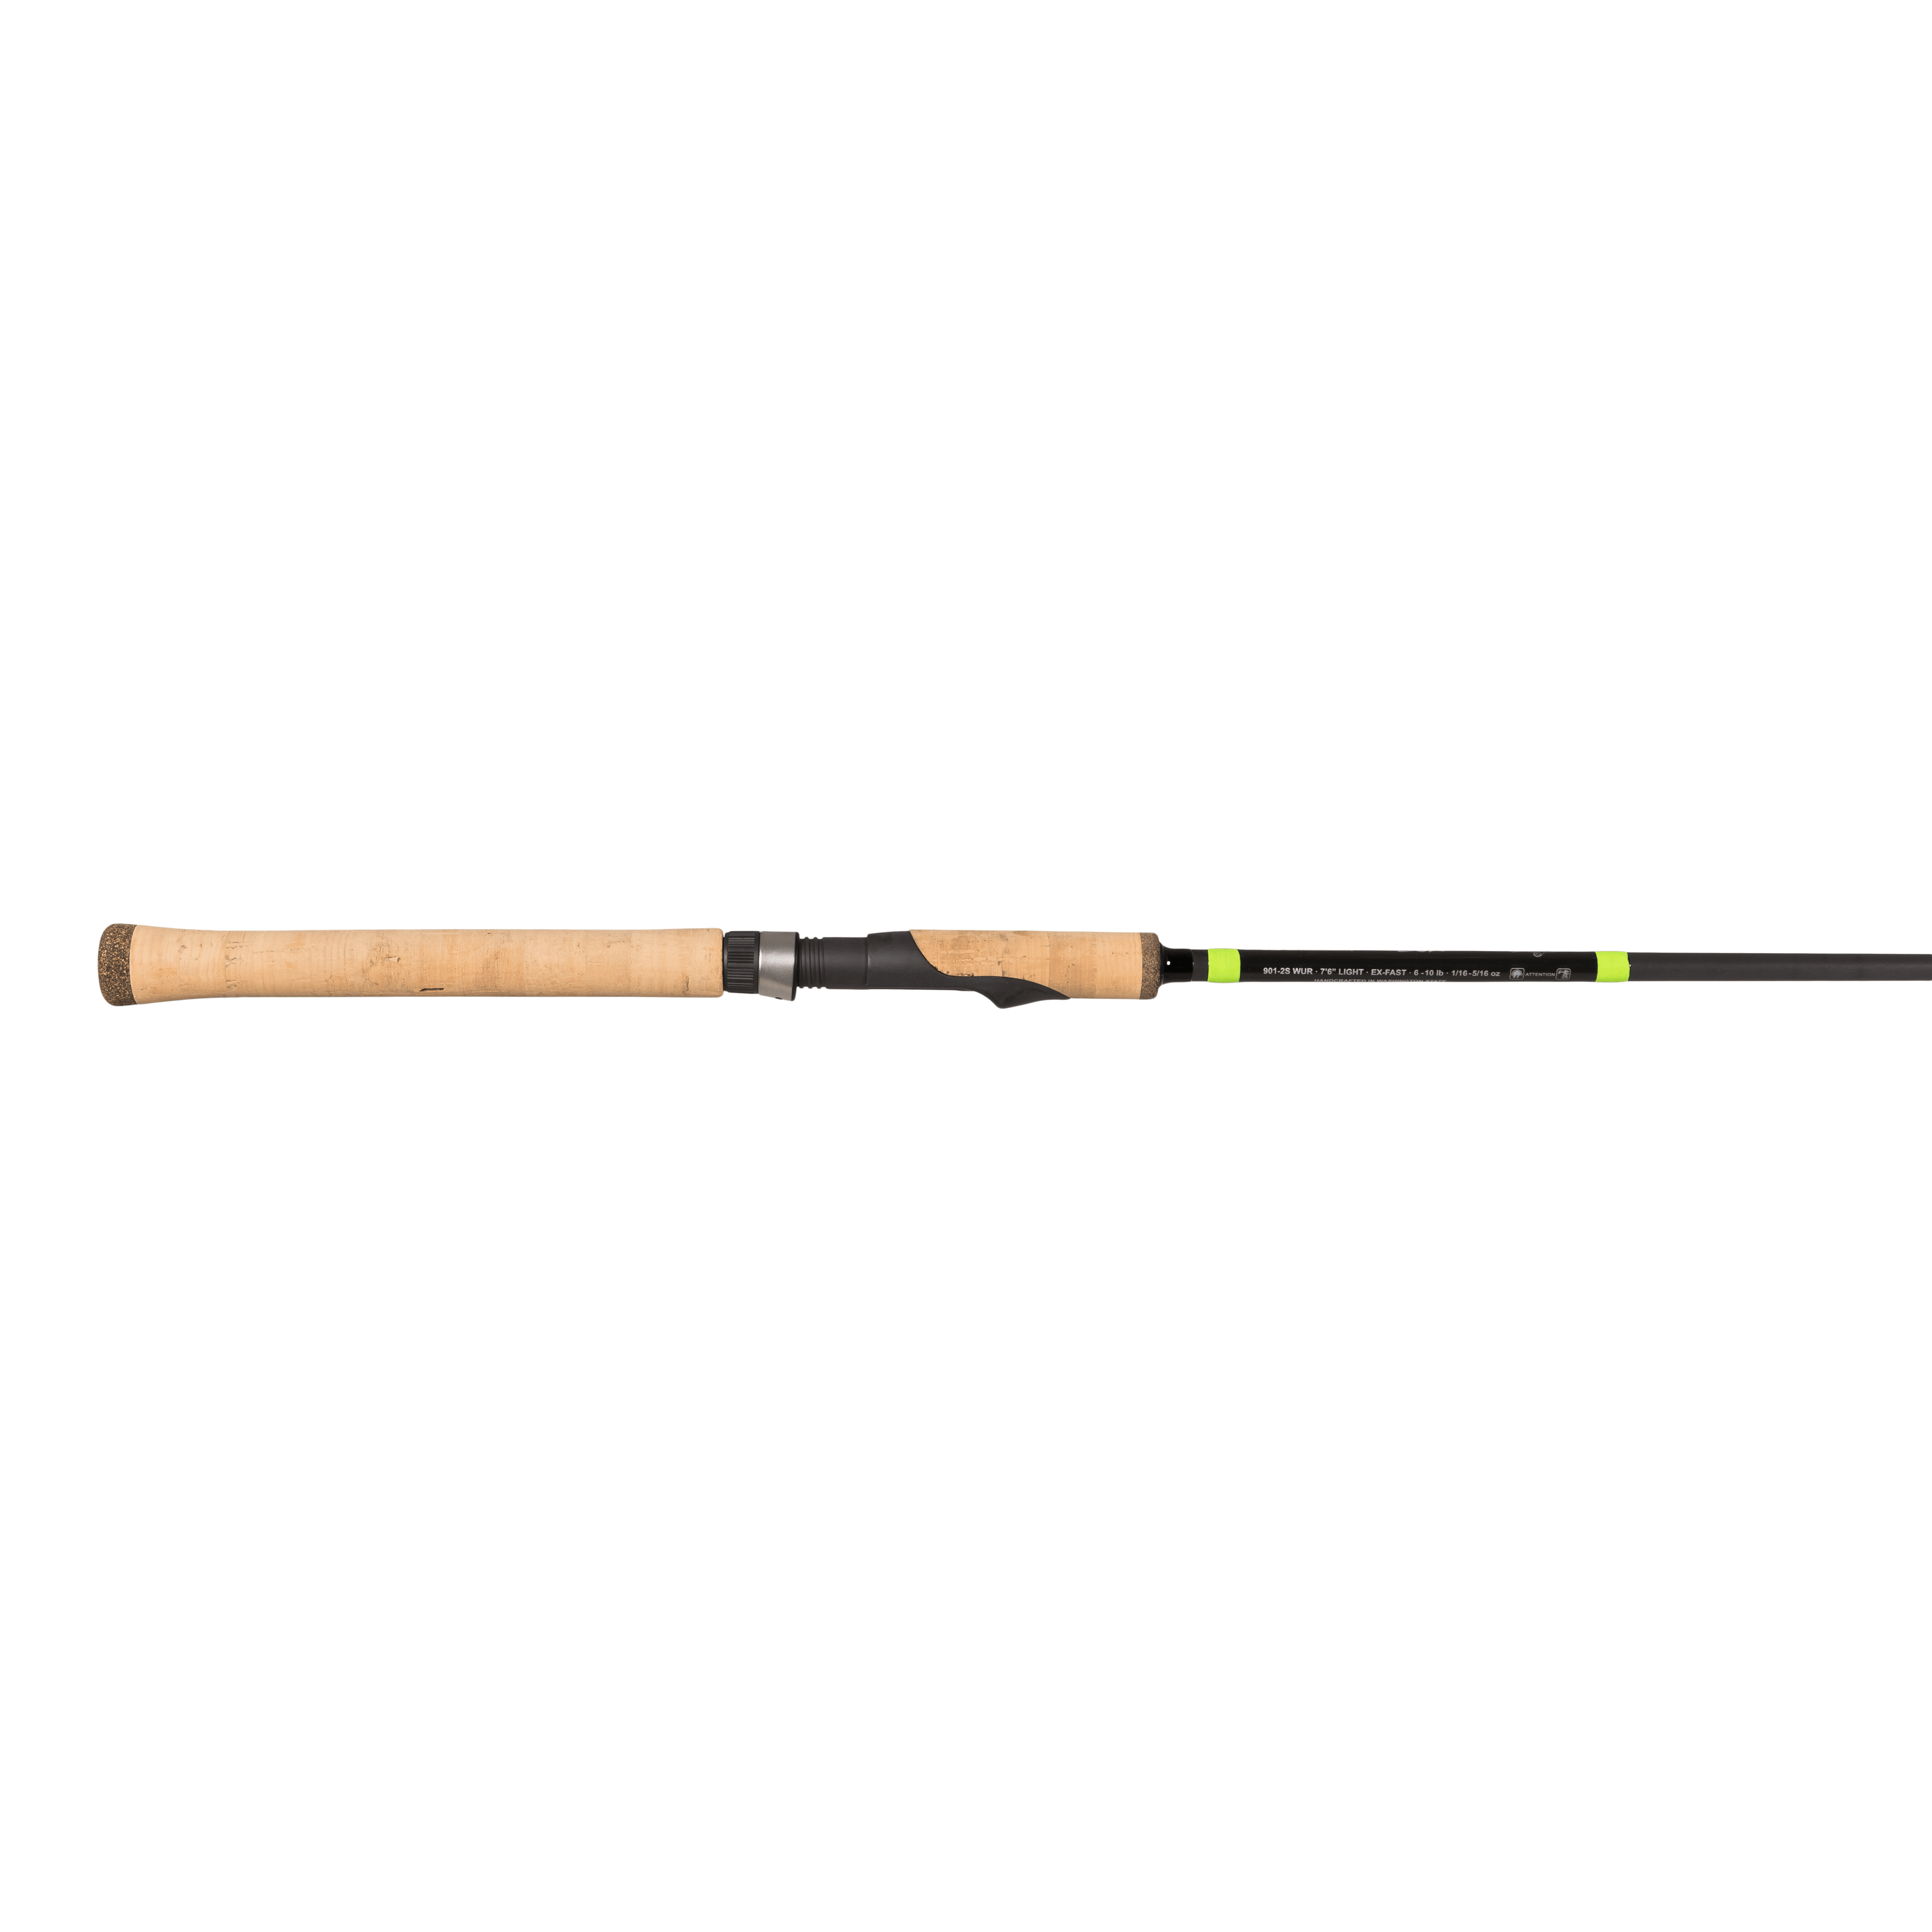 G Loomis E6x 782s Wur 6ft 6in Spinning Rod FM 12777-01 for sale online 